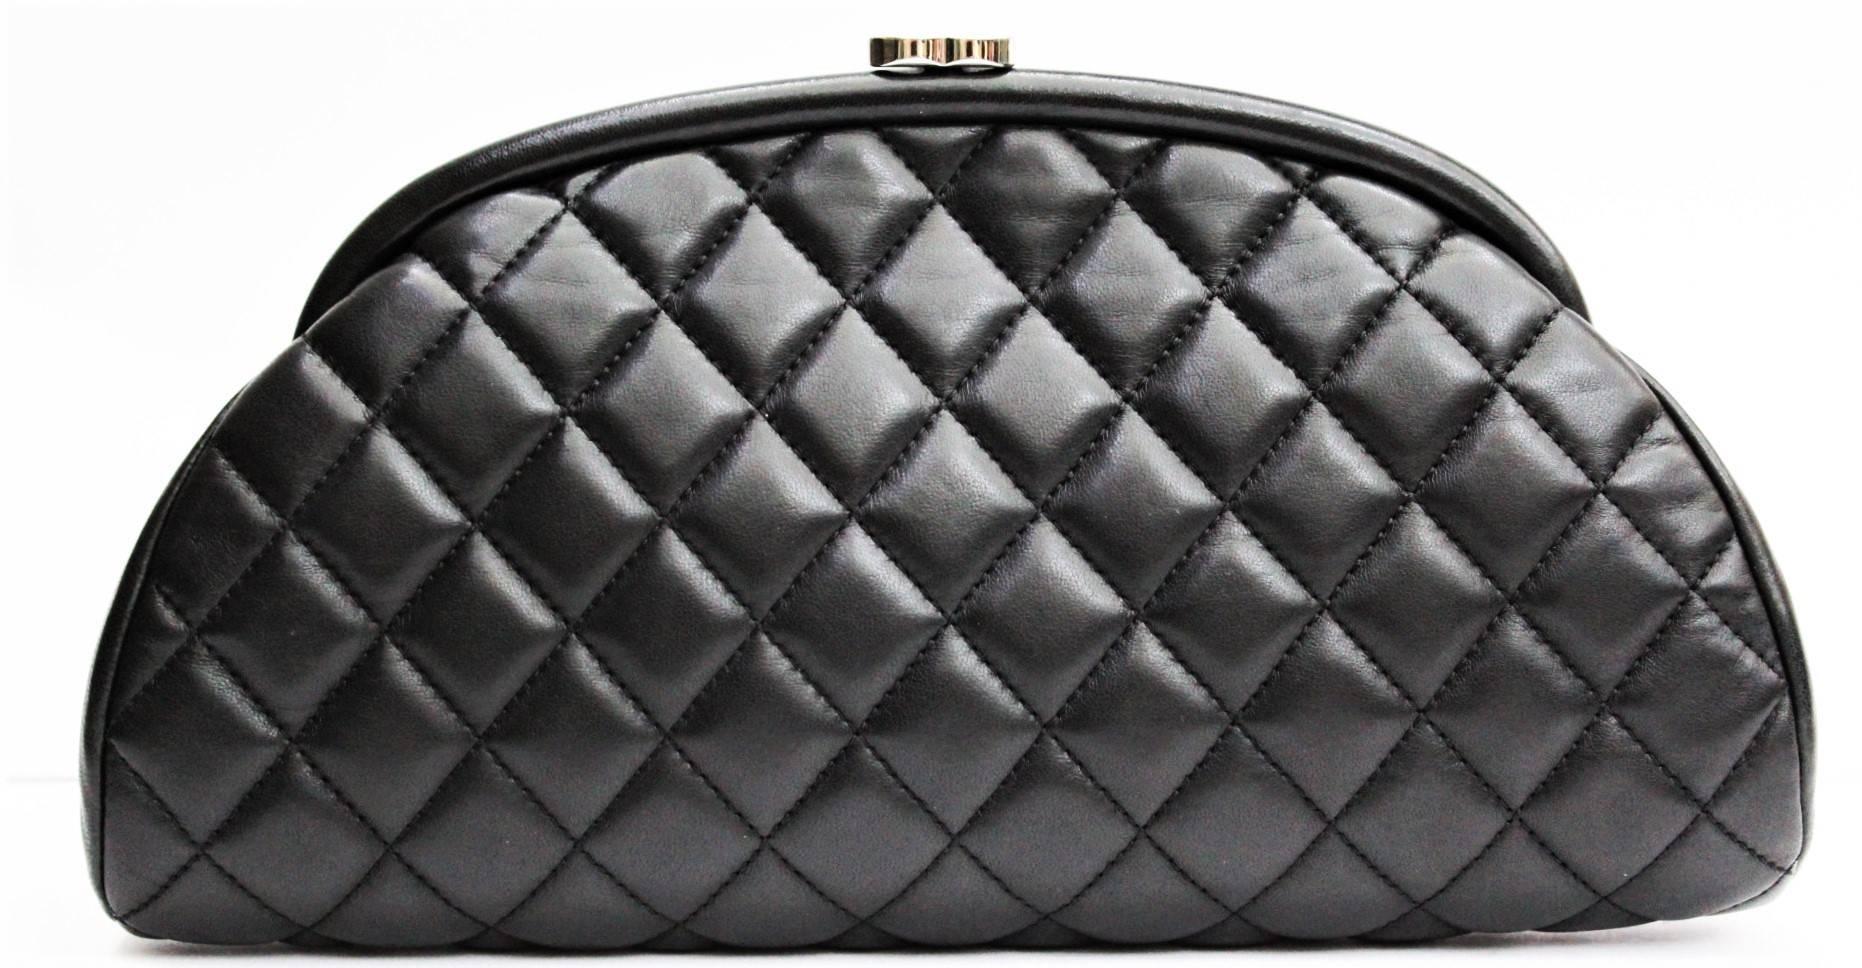 We guarantee this is an authentic CHANEL Lambskin Quilted Timeless Clutch Black or 100% of your money back. This stunning clutch is beautifully crafted of black diamond quilted lambskin leather. The clutch features a top bar and kiss lock in the